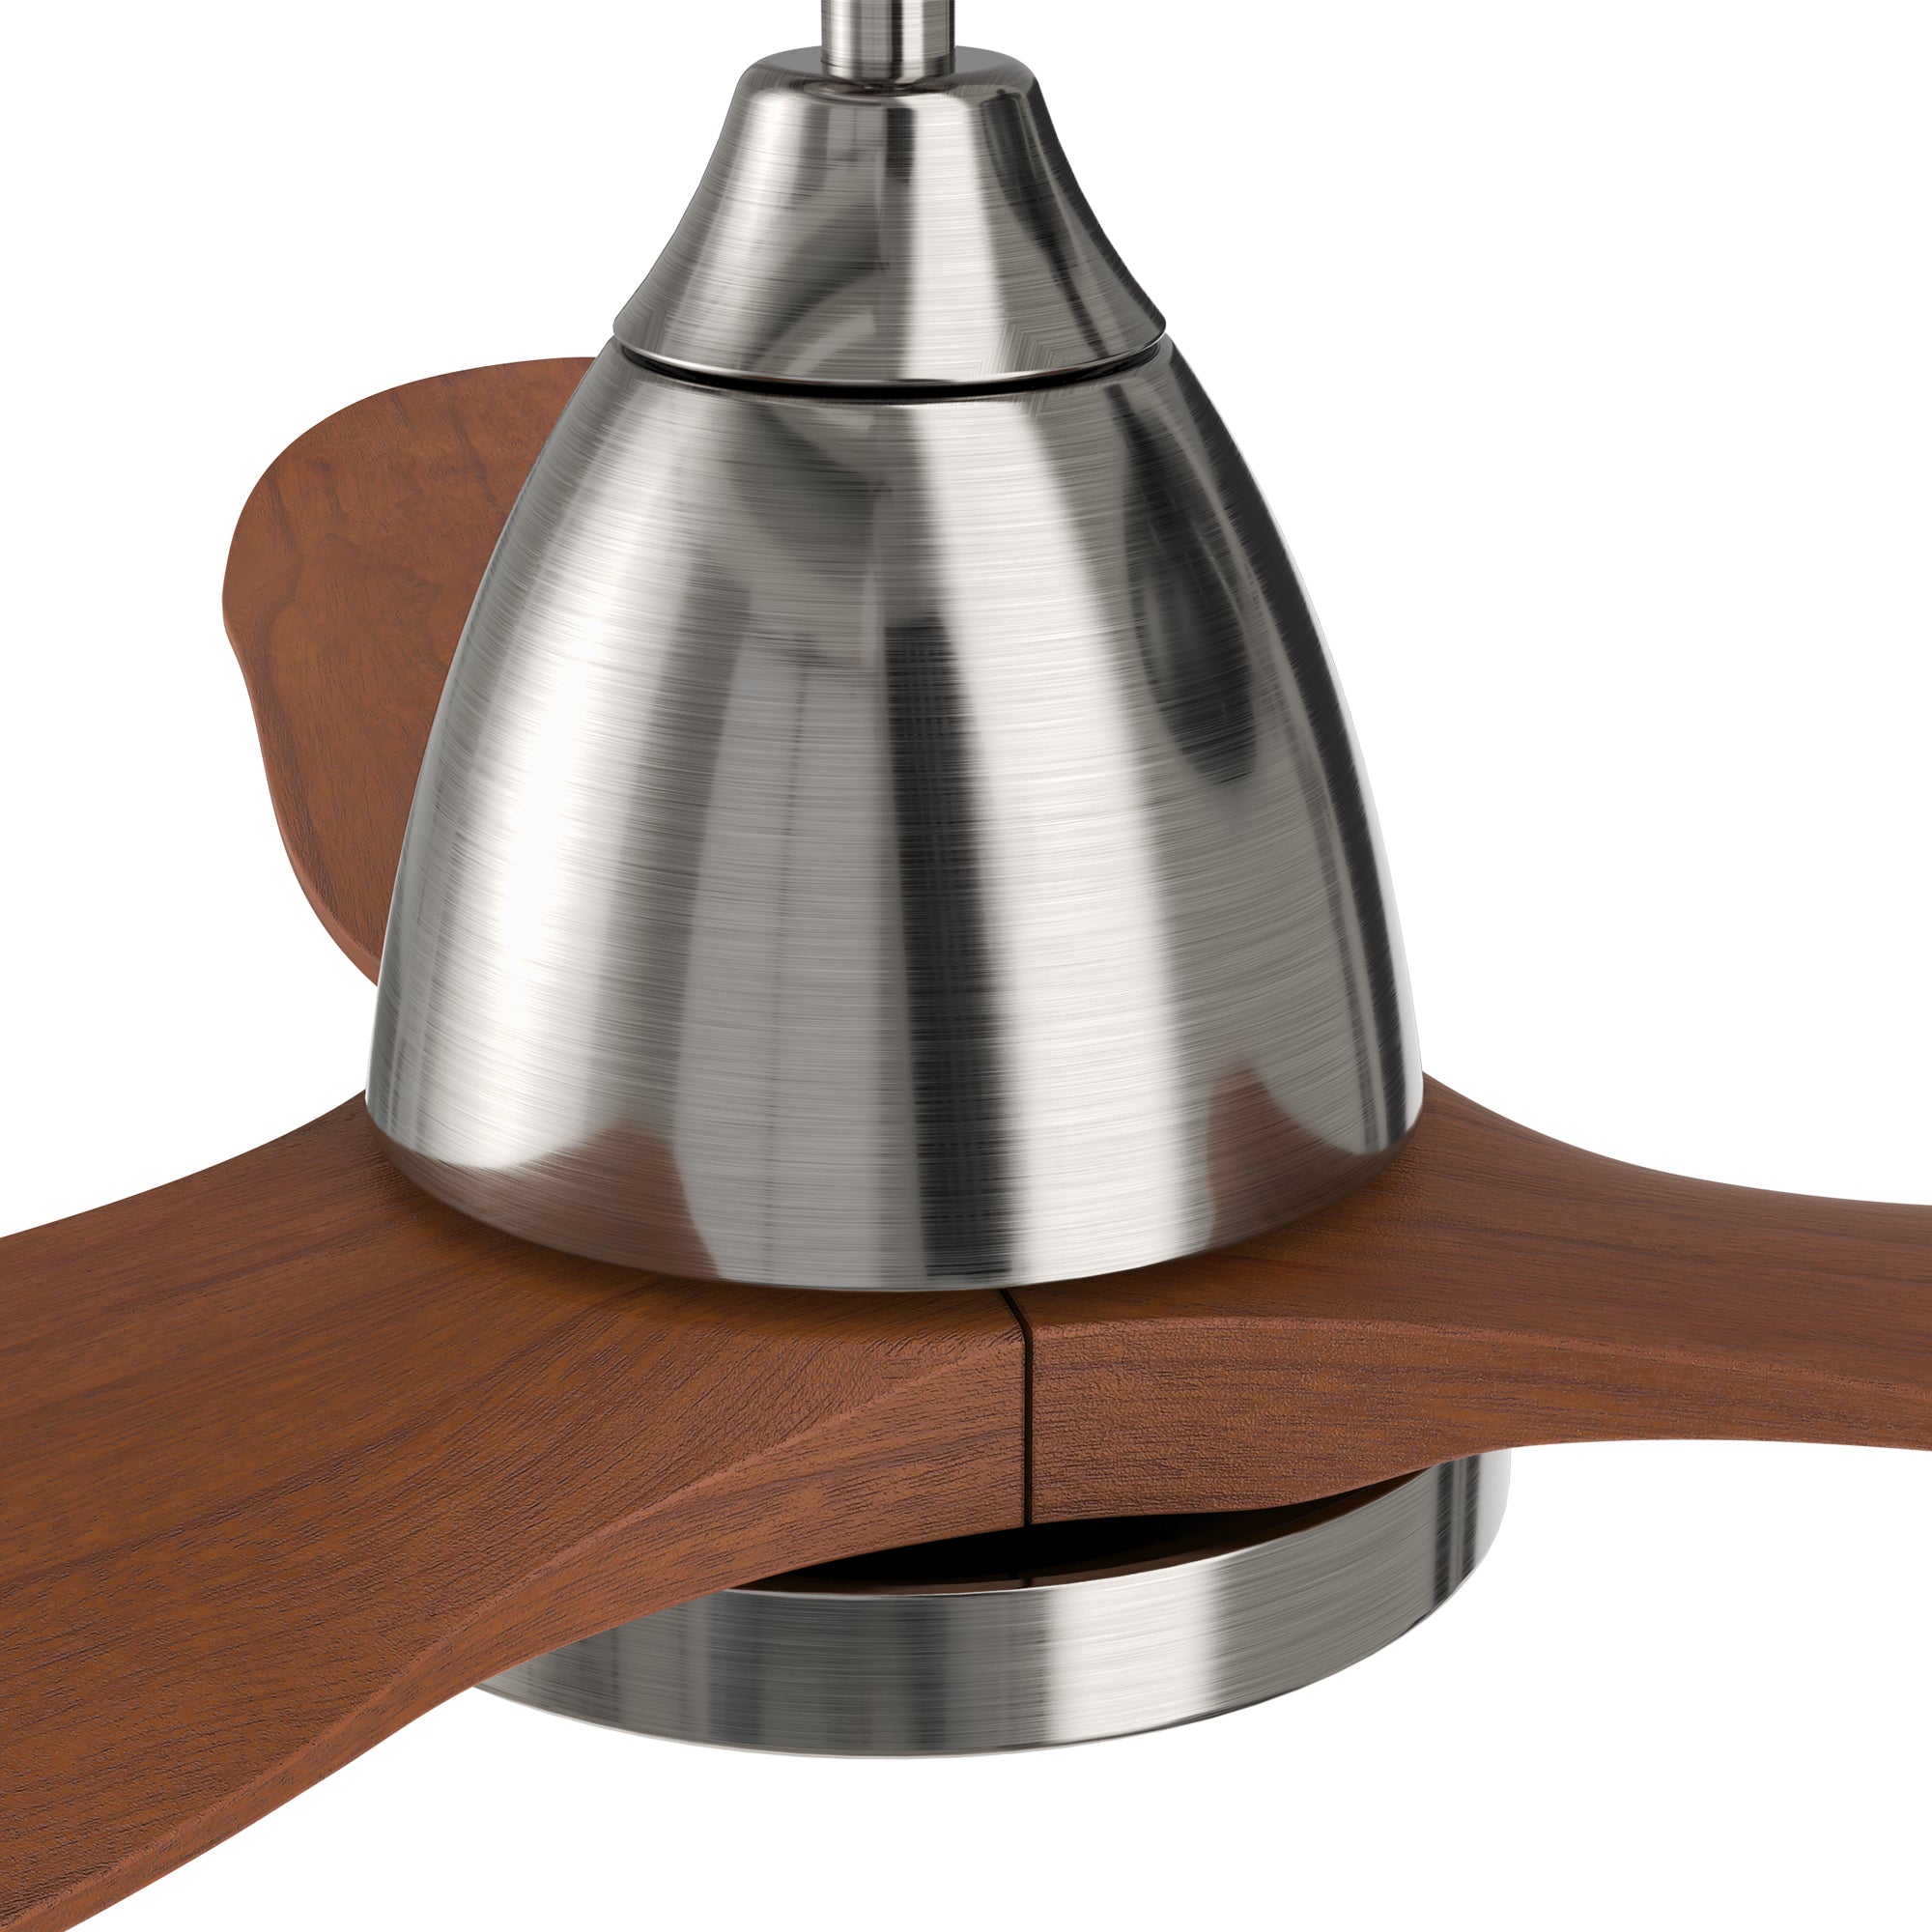 This Koa 52&#39;&#39; smart ceiling fan keeps your space cool, bright, and stylish. It is a soft modern masterpiece perfect for your large indoor living spaces. The fan features Remote control, Wi-Fi apps, Siri Shortcut and Voice control technology (compatible with Amazon Alexa and Google Home Assistant ) to set fan preferences. 